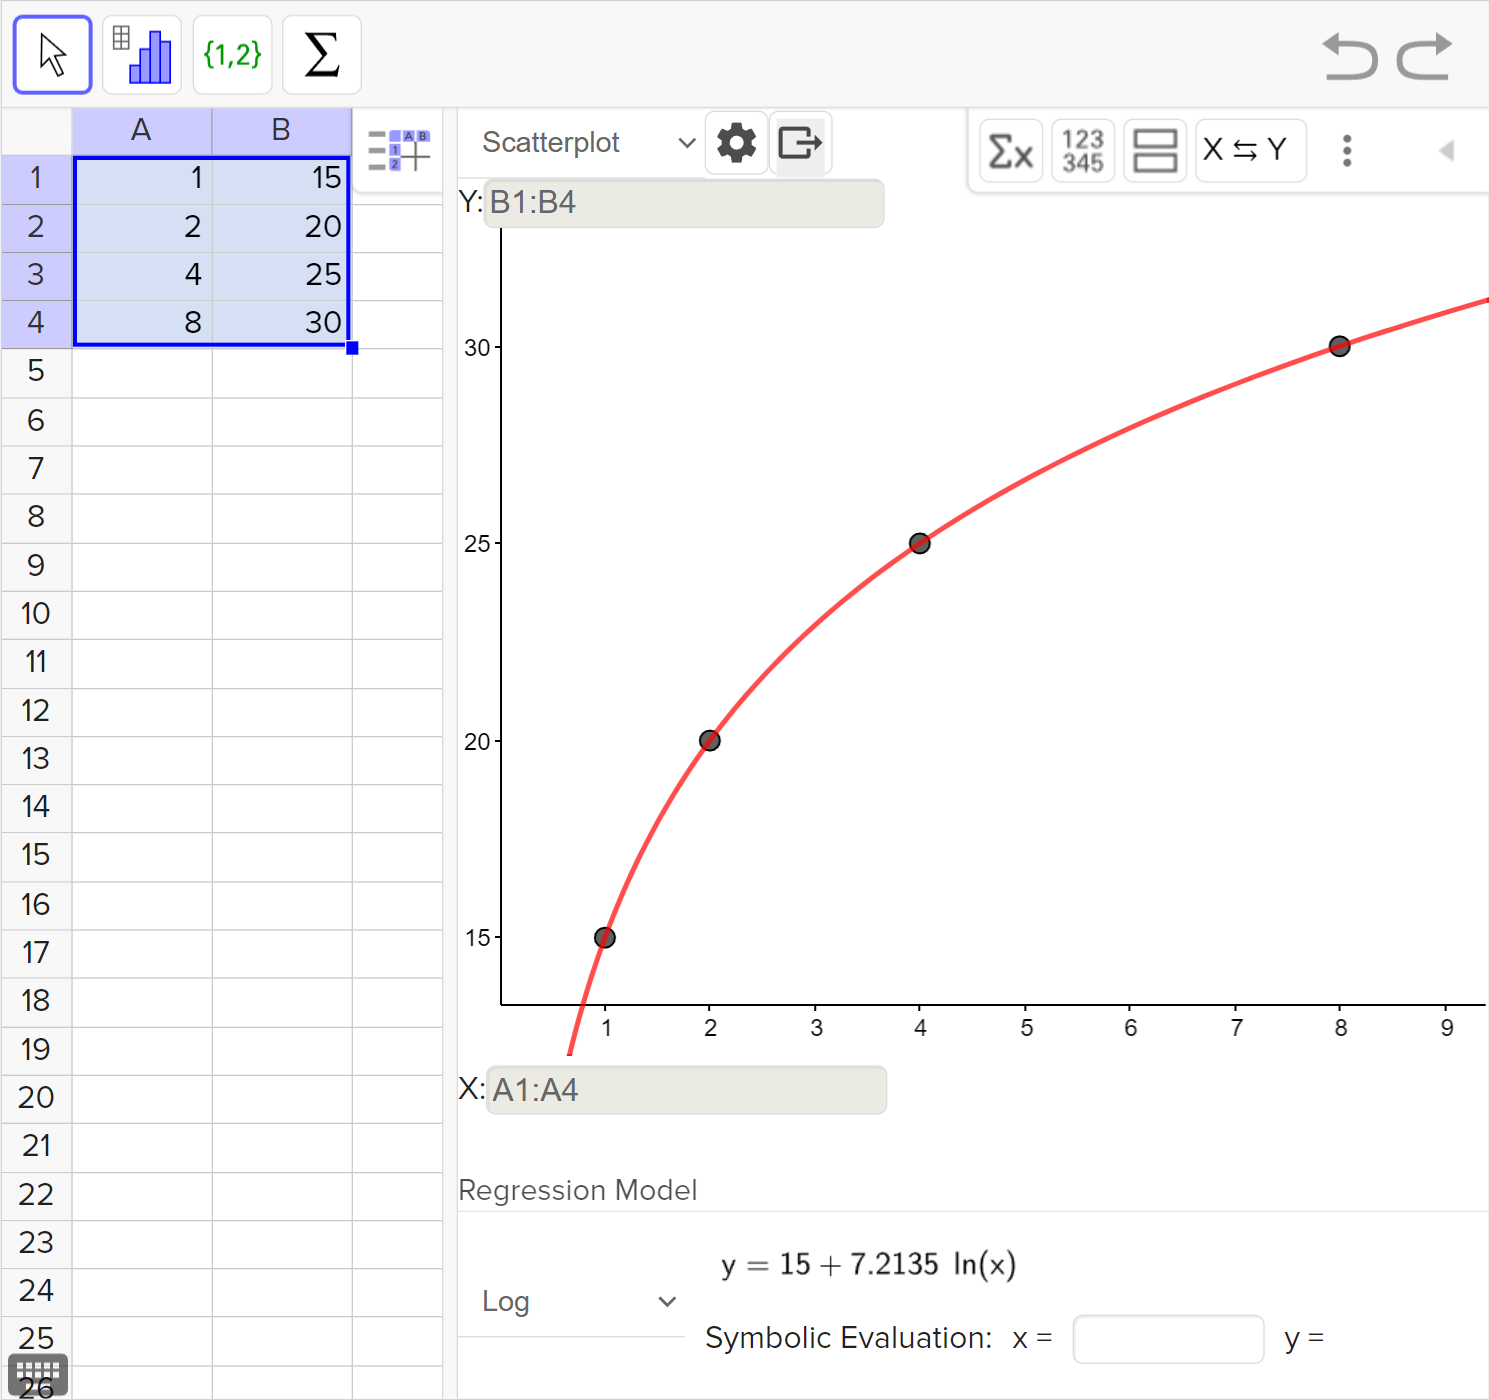 A screenshot of the GeoGebra statistics tool showing the following: On the left side: the numbers 1, 2, 4, and 8 entered in column A, rows 1 to 4, and 15, 20, 25, and 30 entered in column B, rows 1 to 4. The cells from column A, rows 1 to 4, and column B, rows 1 to 4, are selected. On the right side: a scatterplot and the best fit curve are shown. Speak to your teacher for more details.